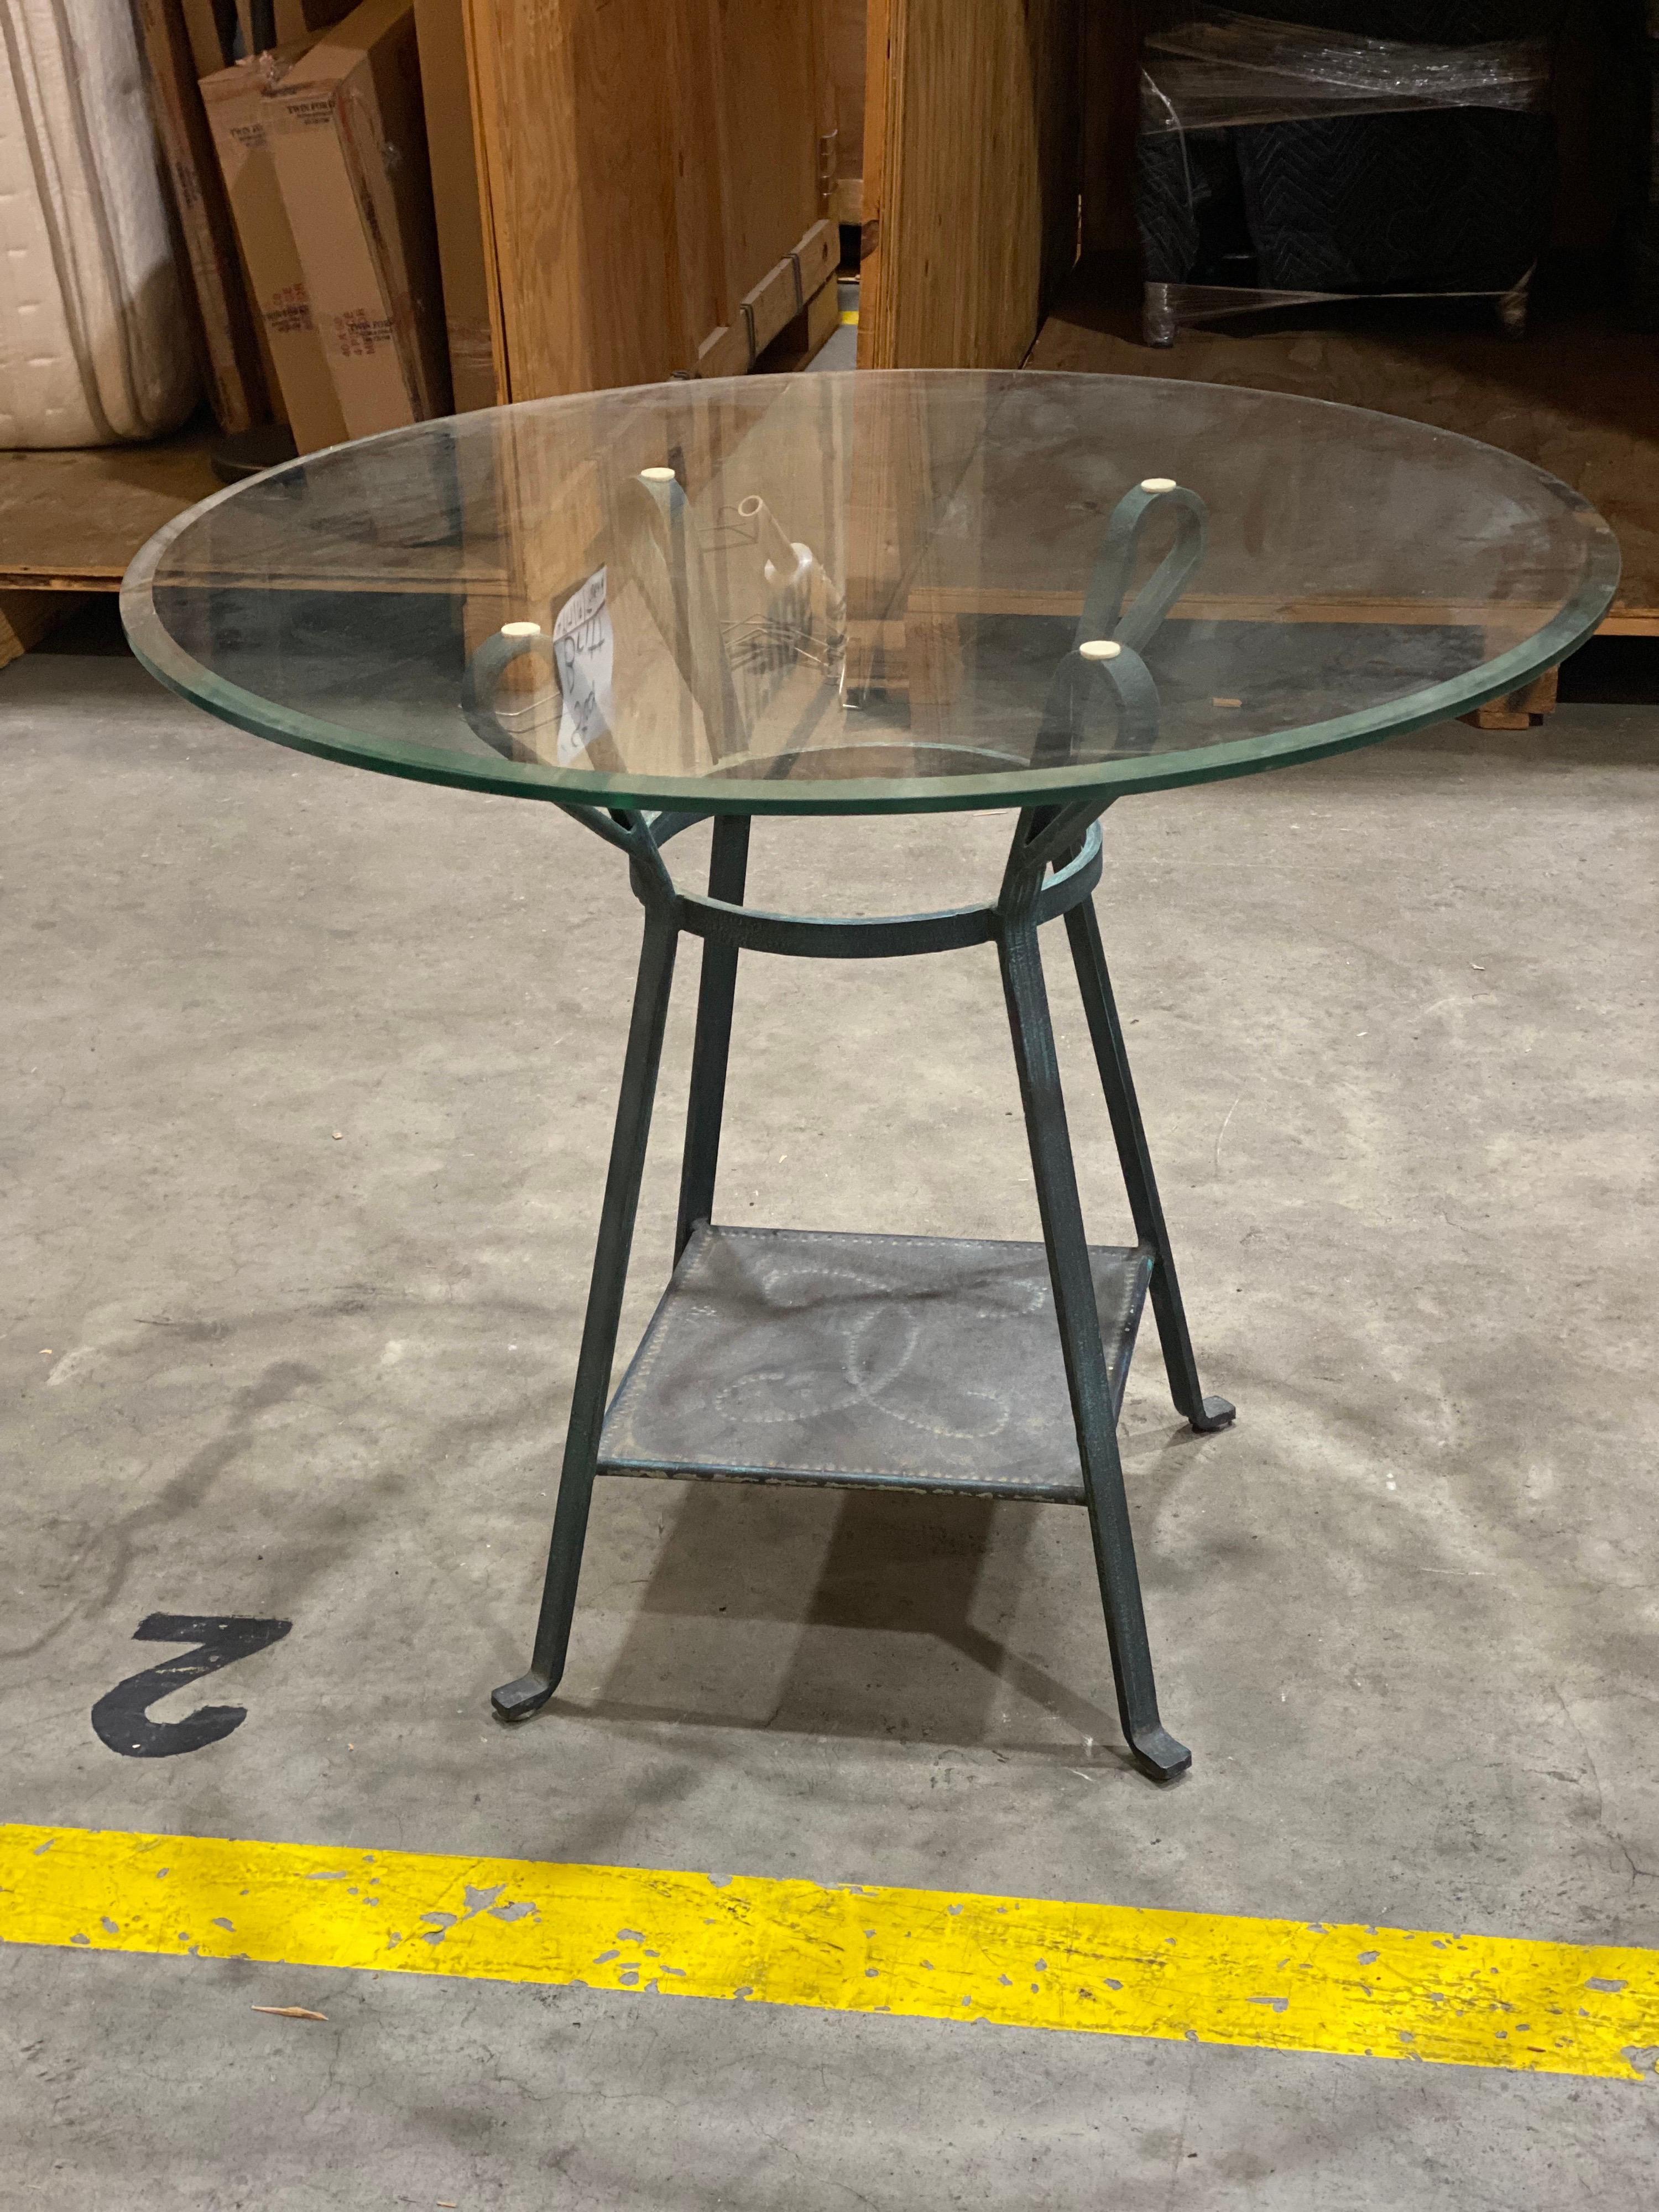 Glass top metal table
Sweet metal base with pressed dot motif on shelf. Looped metal holding a beveled glass top. The finish looks like a worn verdigris finish. 

Measures: 36